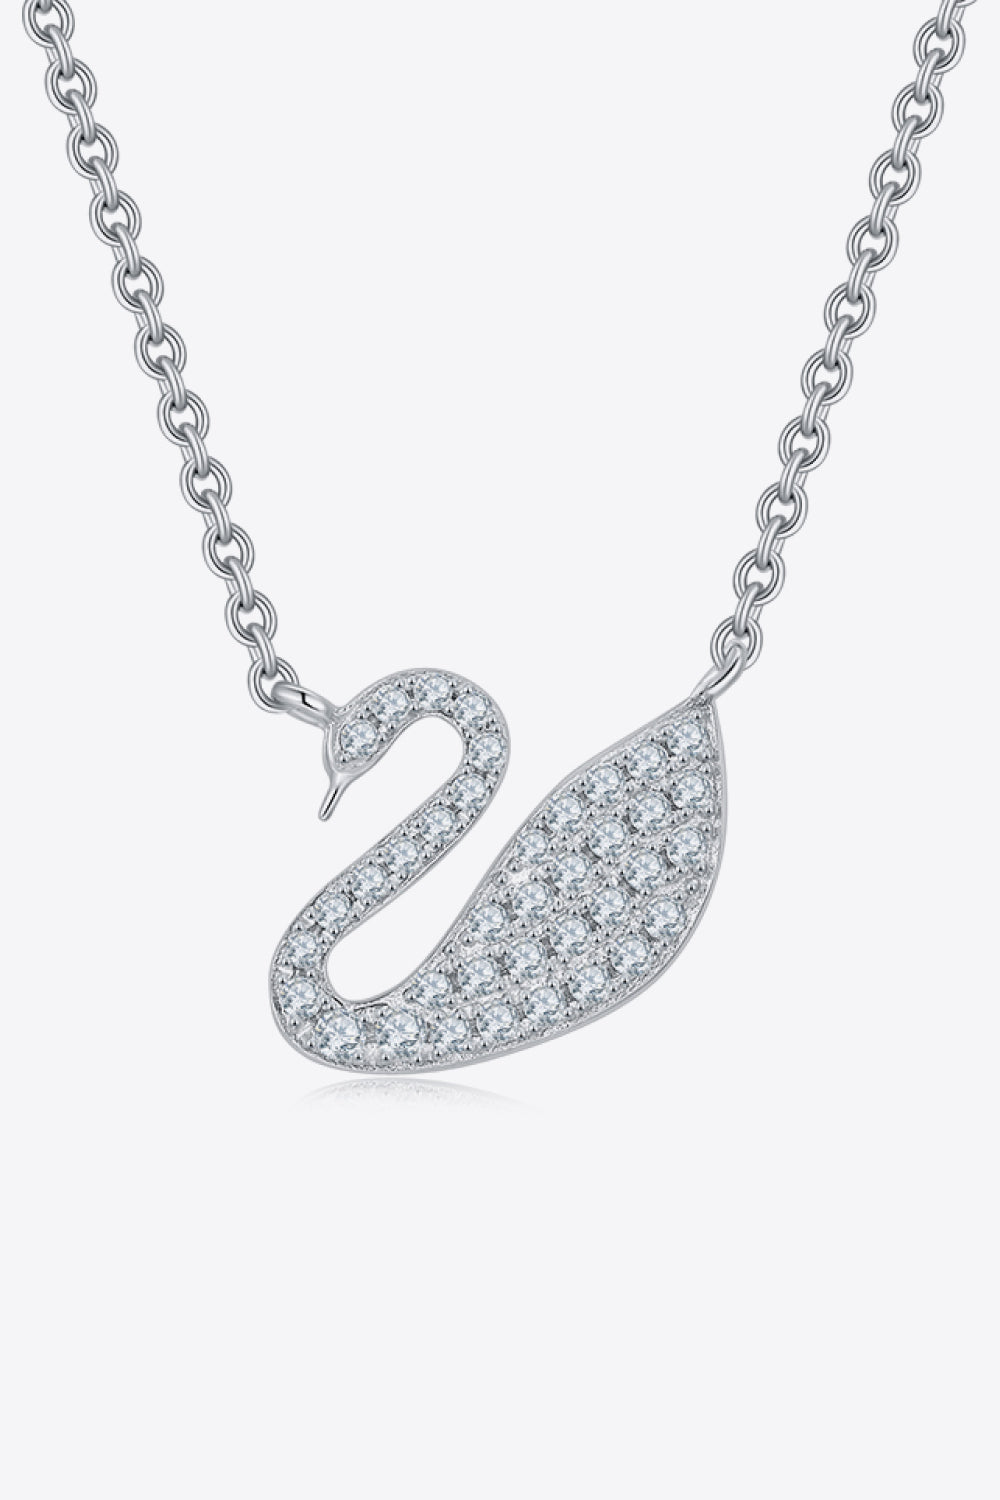 Moissanite Swan 925 Sterling Silver Necklace - Online Only